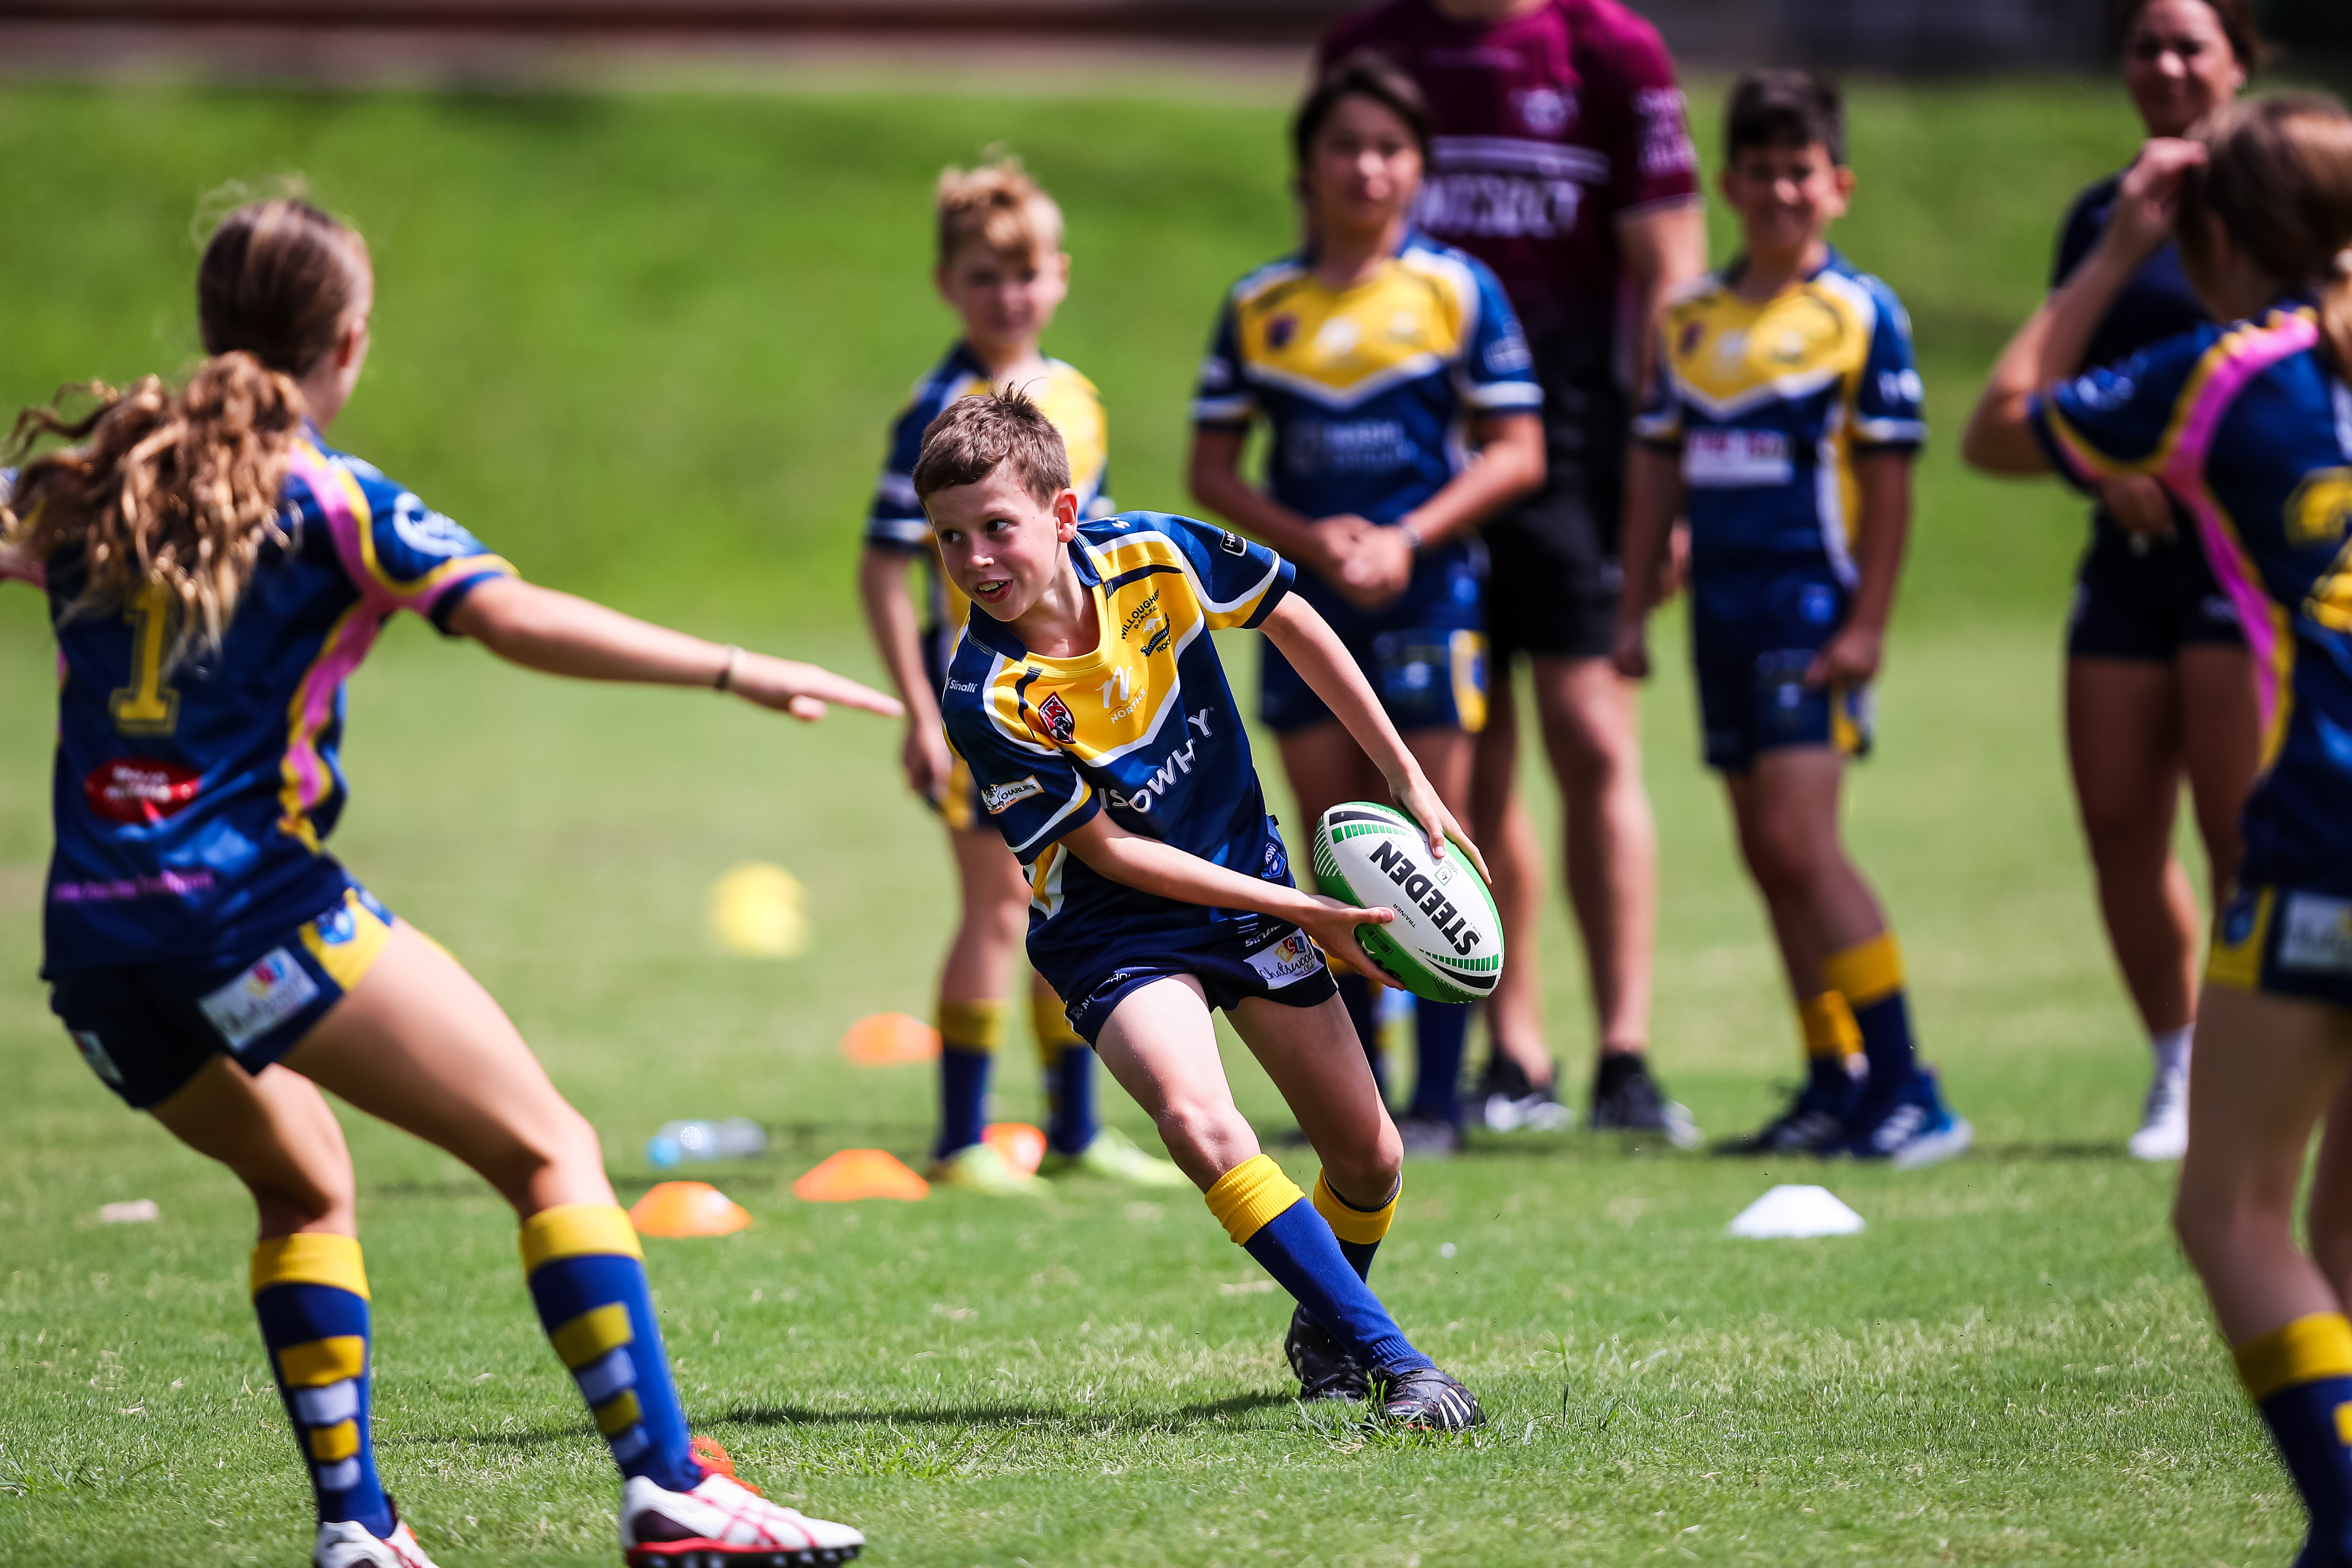 Find your nearest Rugby League Club or Program today!